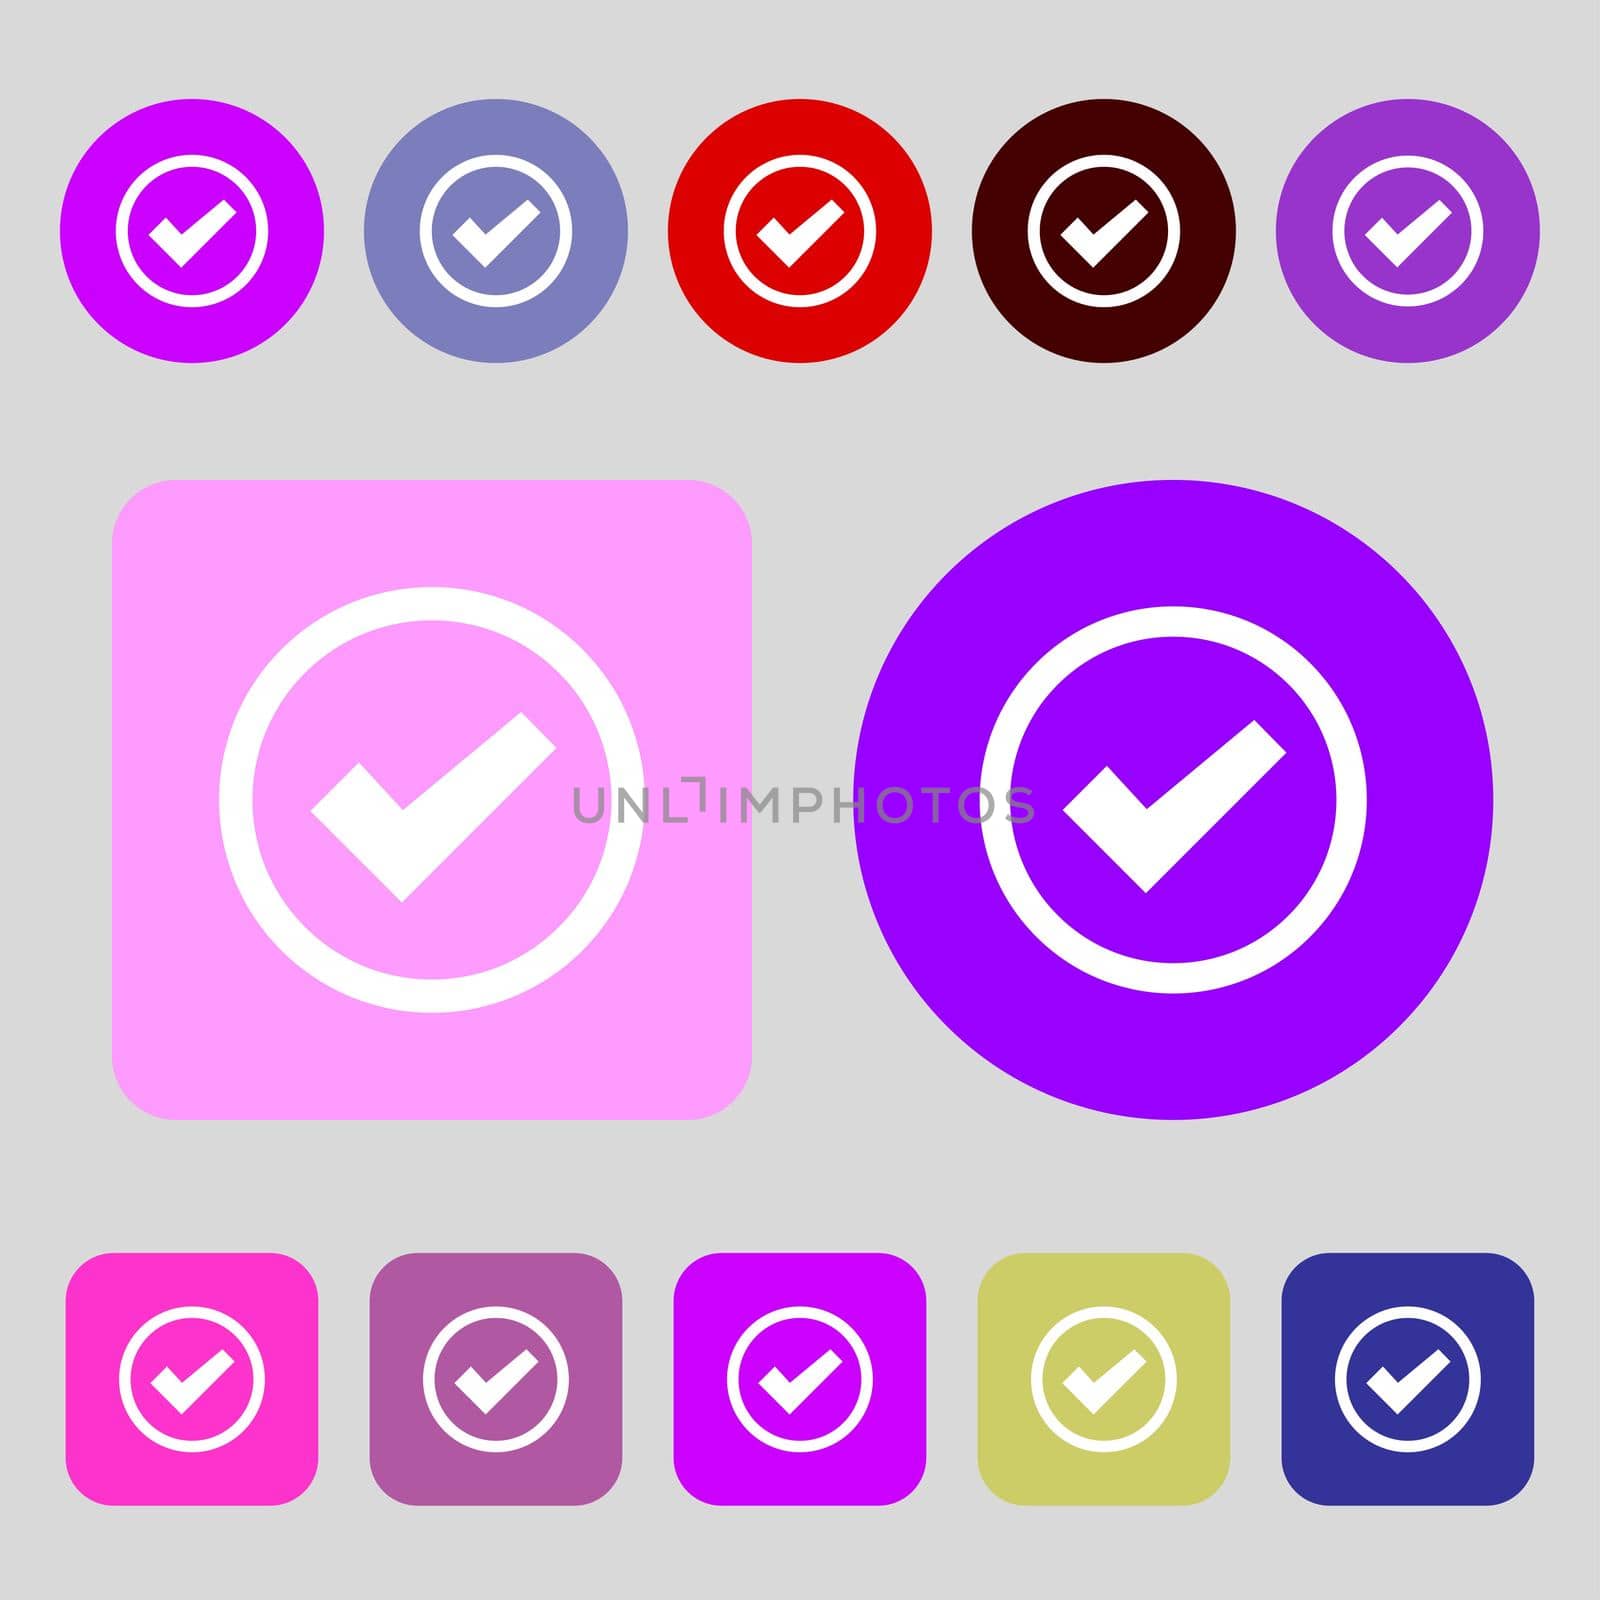 Check mark sign icon . Confirm approved symbol.12 colored buttons. Flat design. illustration